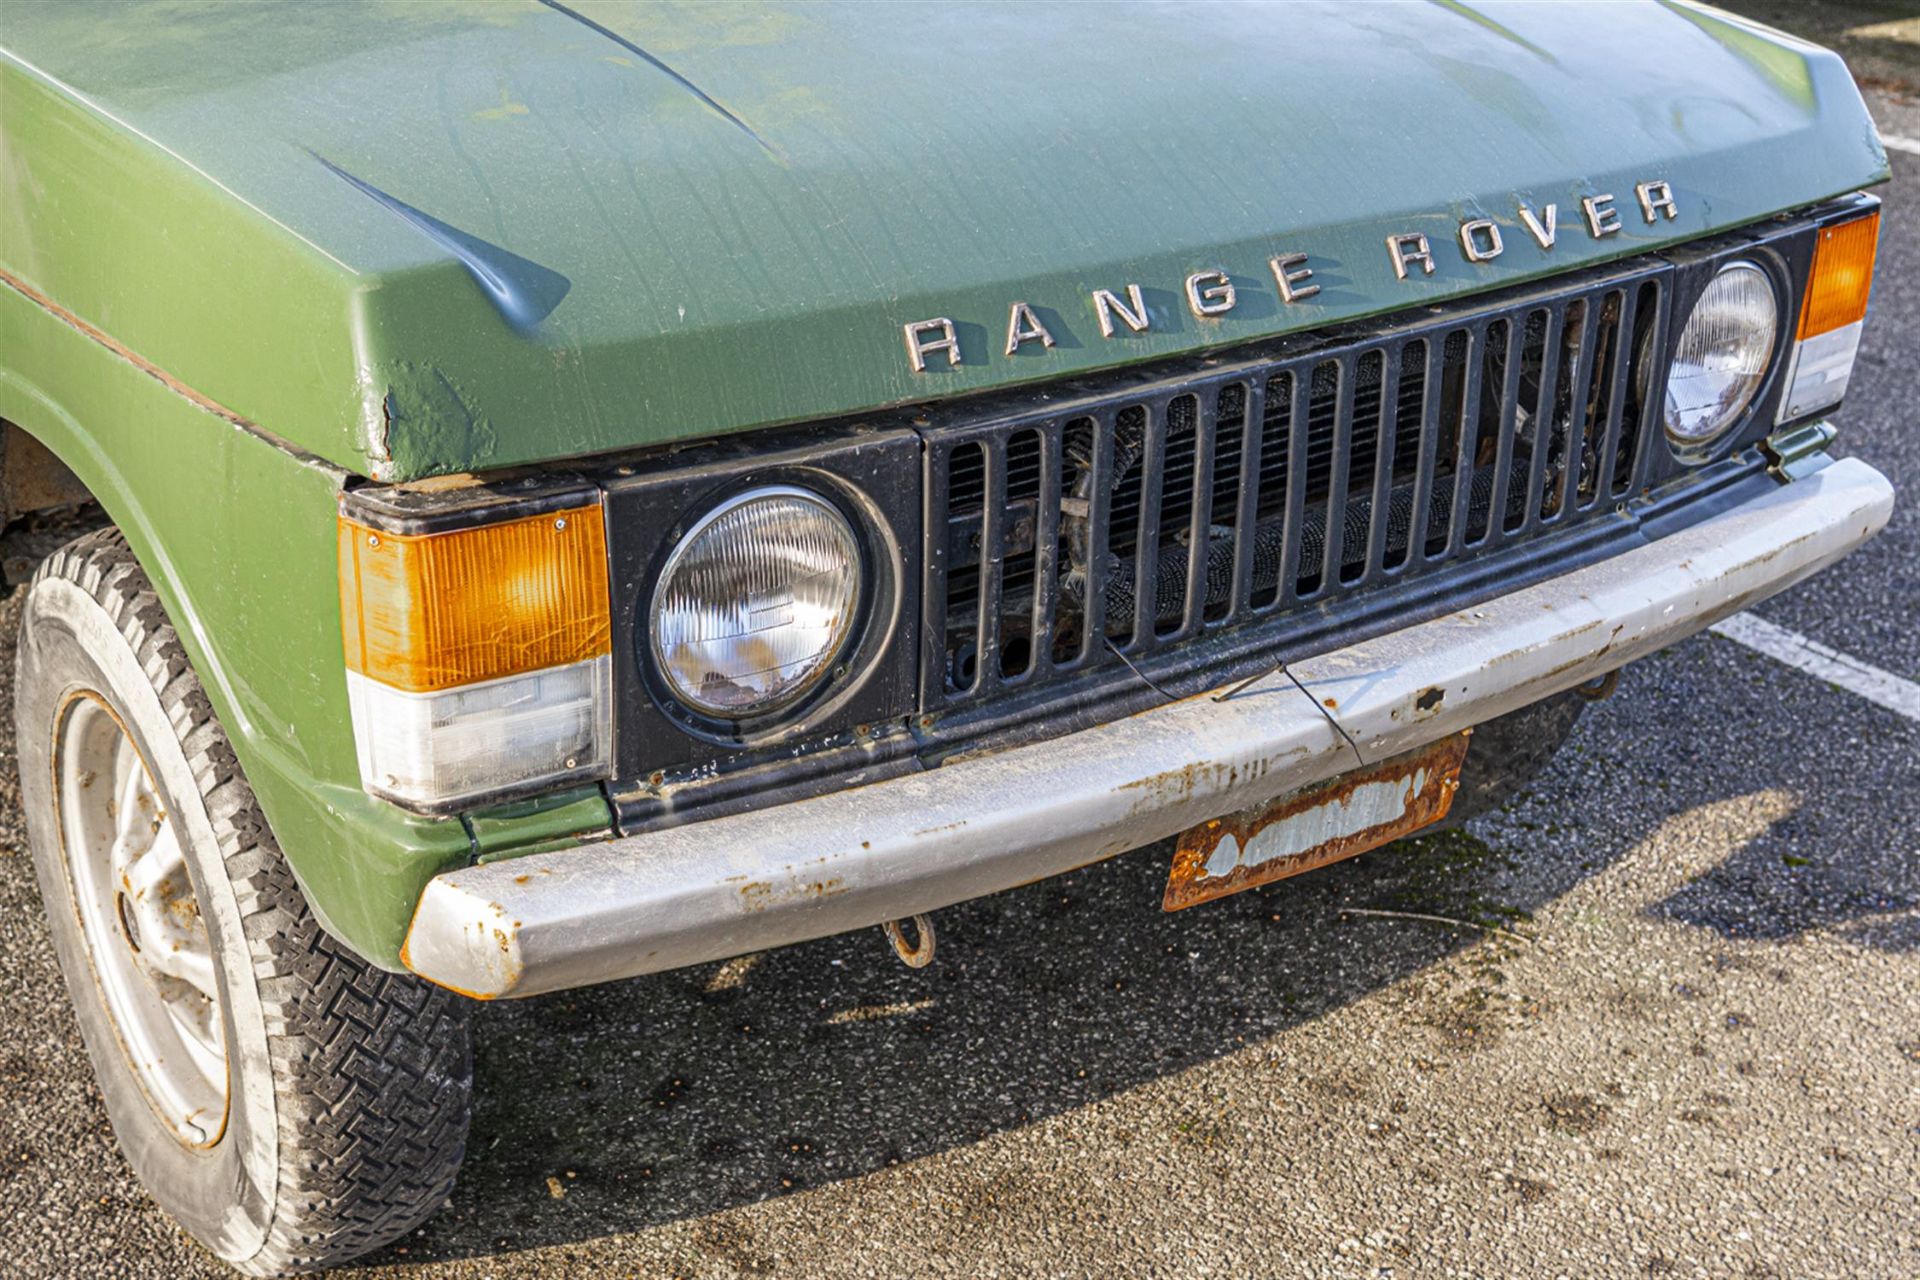 1972 Range Rover Classic 'Suffix A' - Image 4 of 5